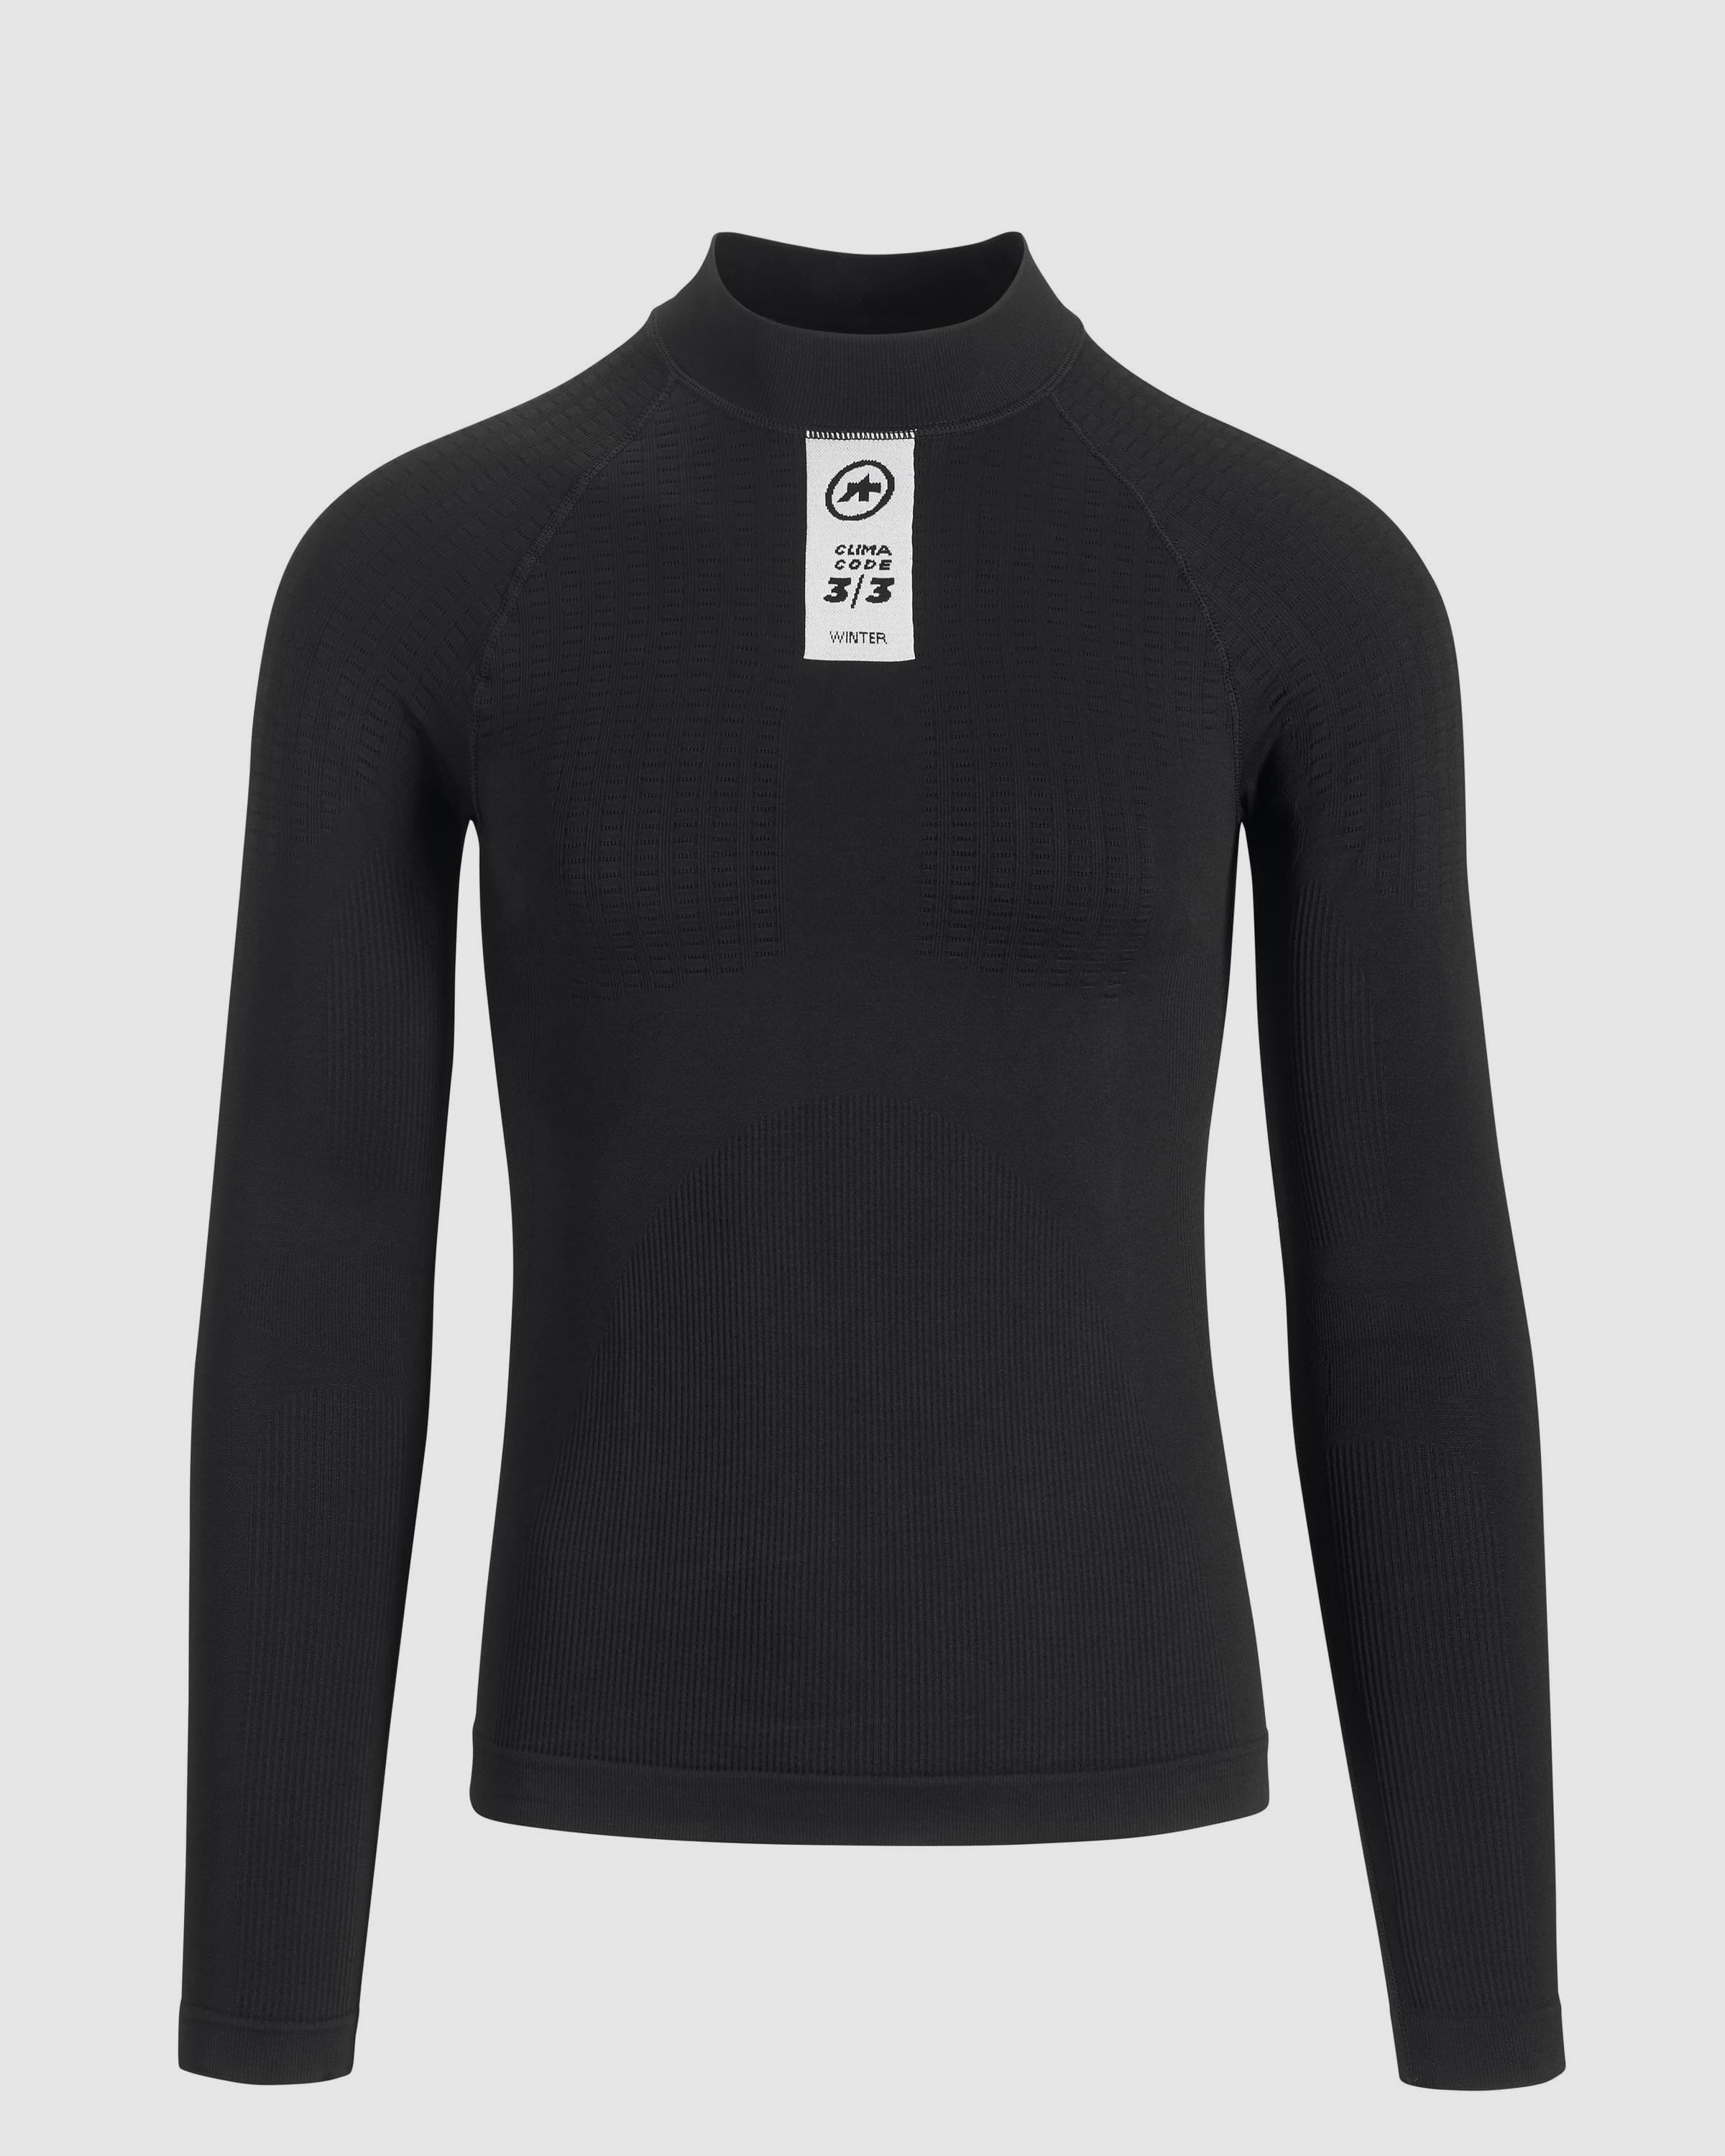 SKINFOIL Winter LS Base Layer - ASSOS Of Switzerland - Official Outlet